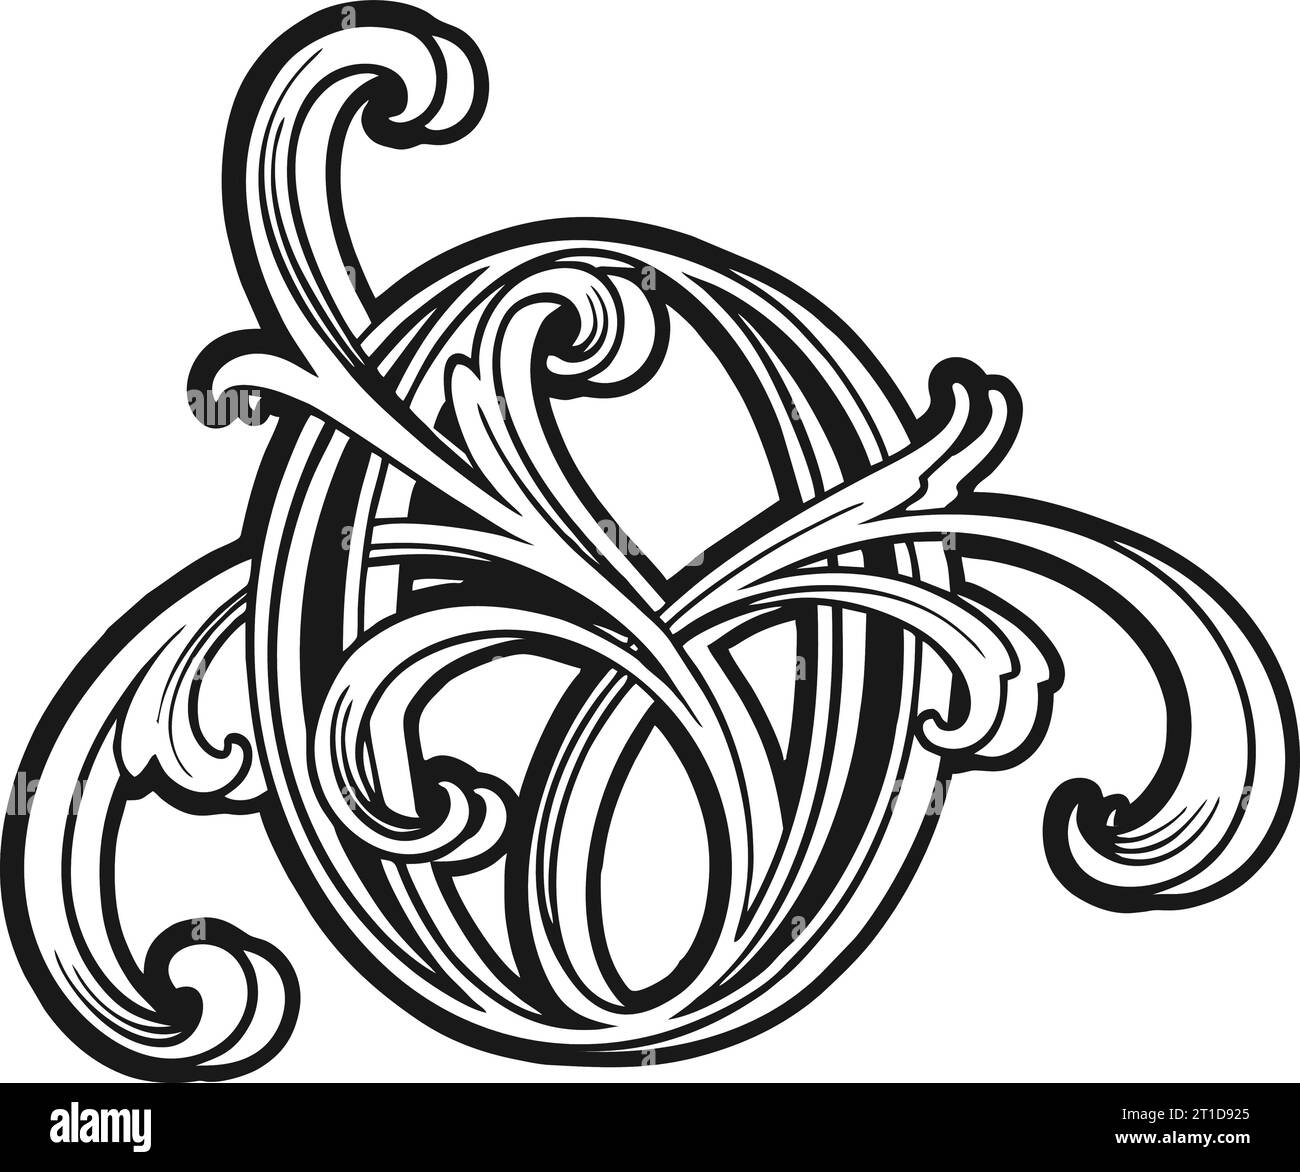 Classic flourish luxury number 0 monogram logo outline vector illustrations for your work logo, merchandise t-shirt, stickers and label designs, poste Stock Vector